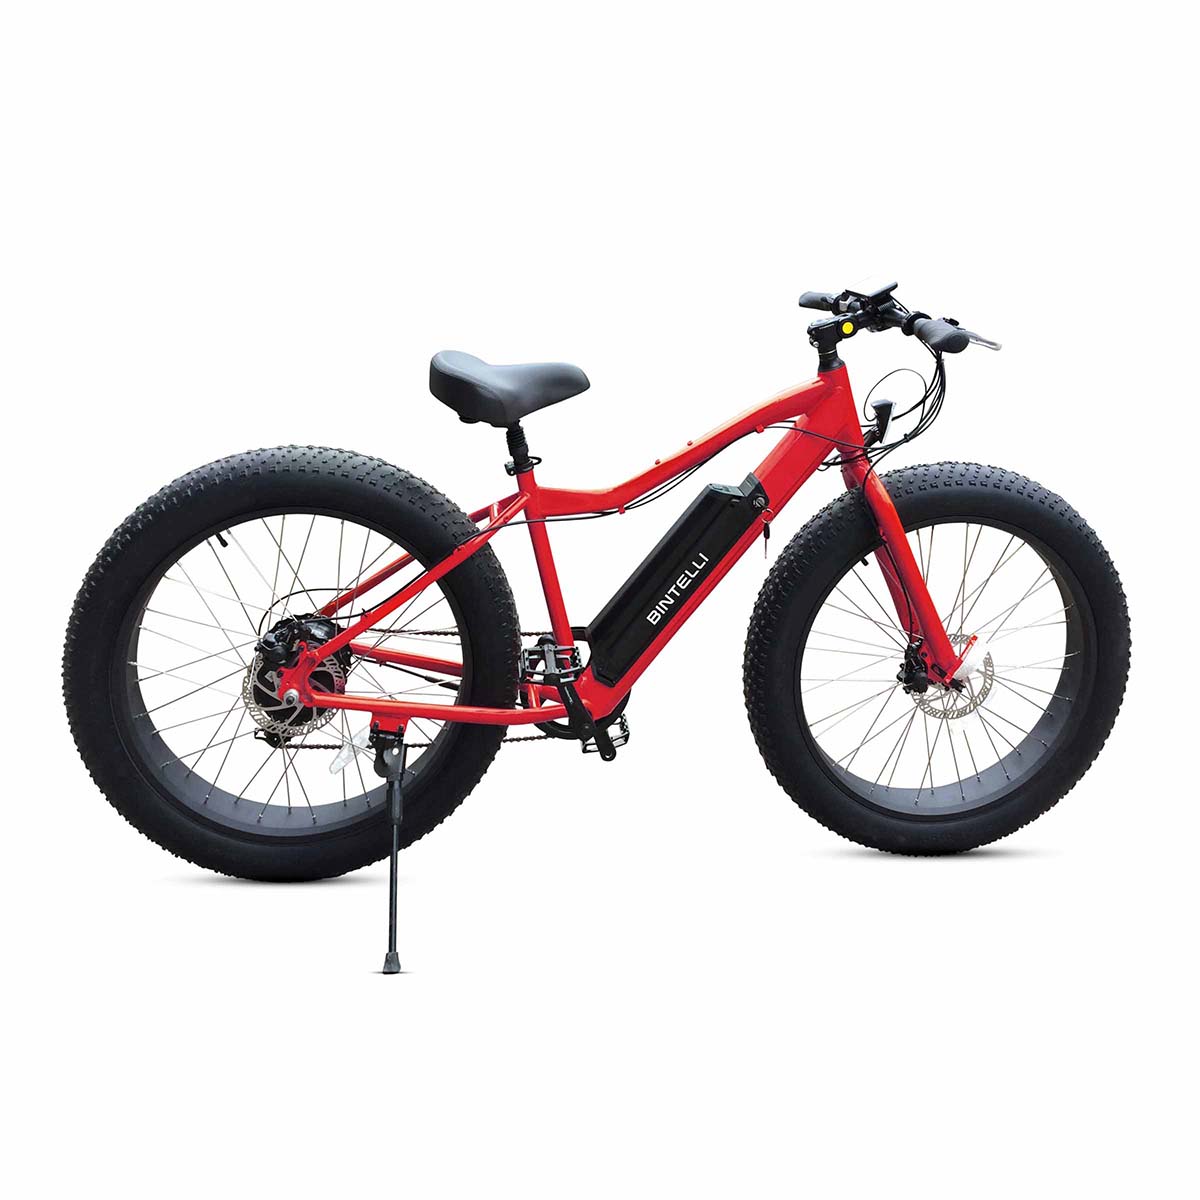 Bintelli M1 Electric Bicycle in Color Red With Fat Tire